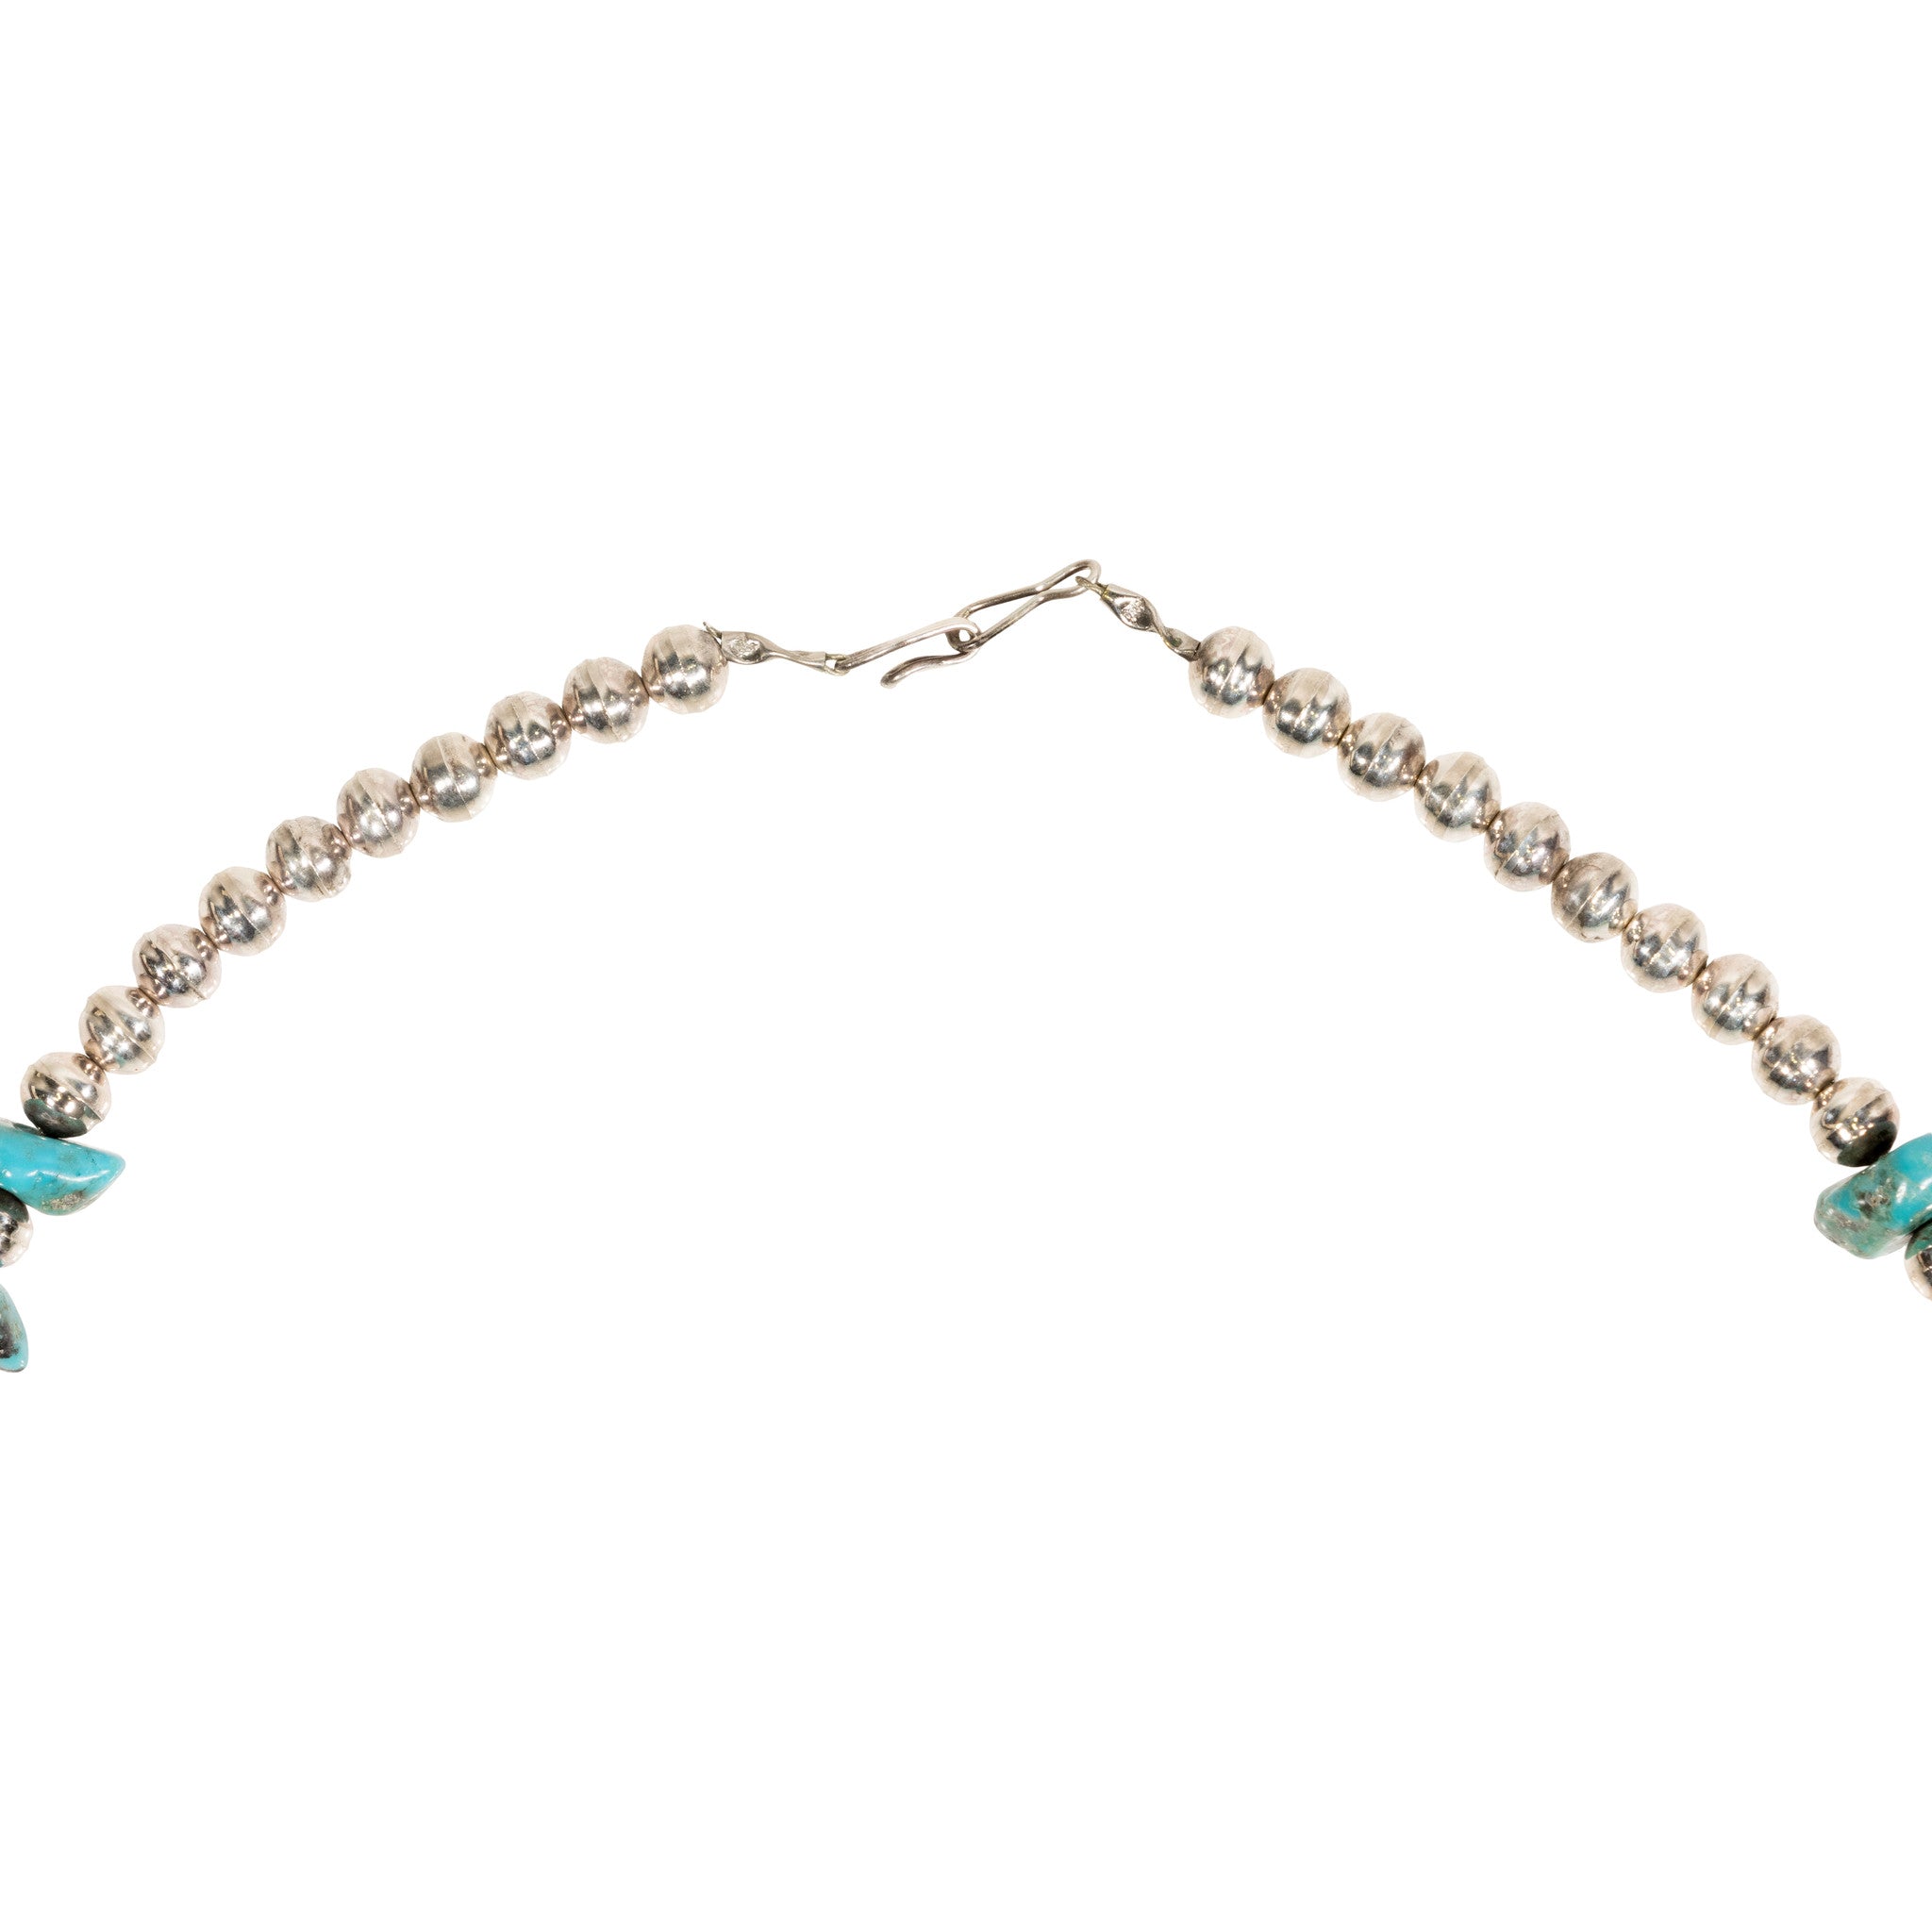 Navajo Turquoise and Silver Necklace